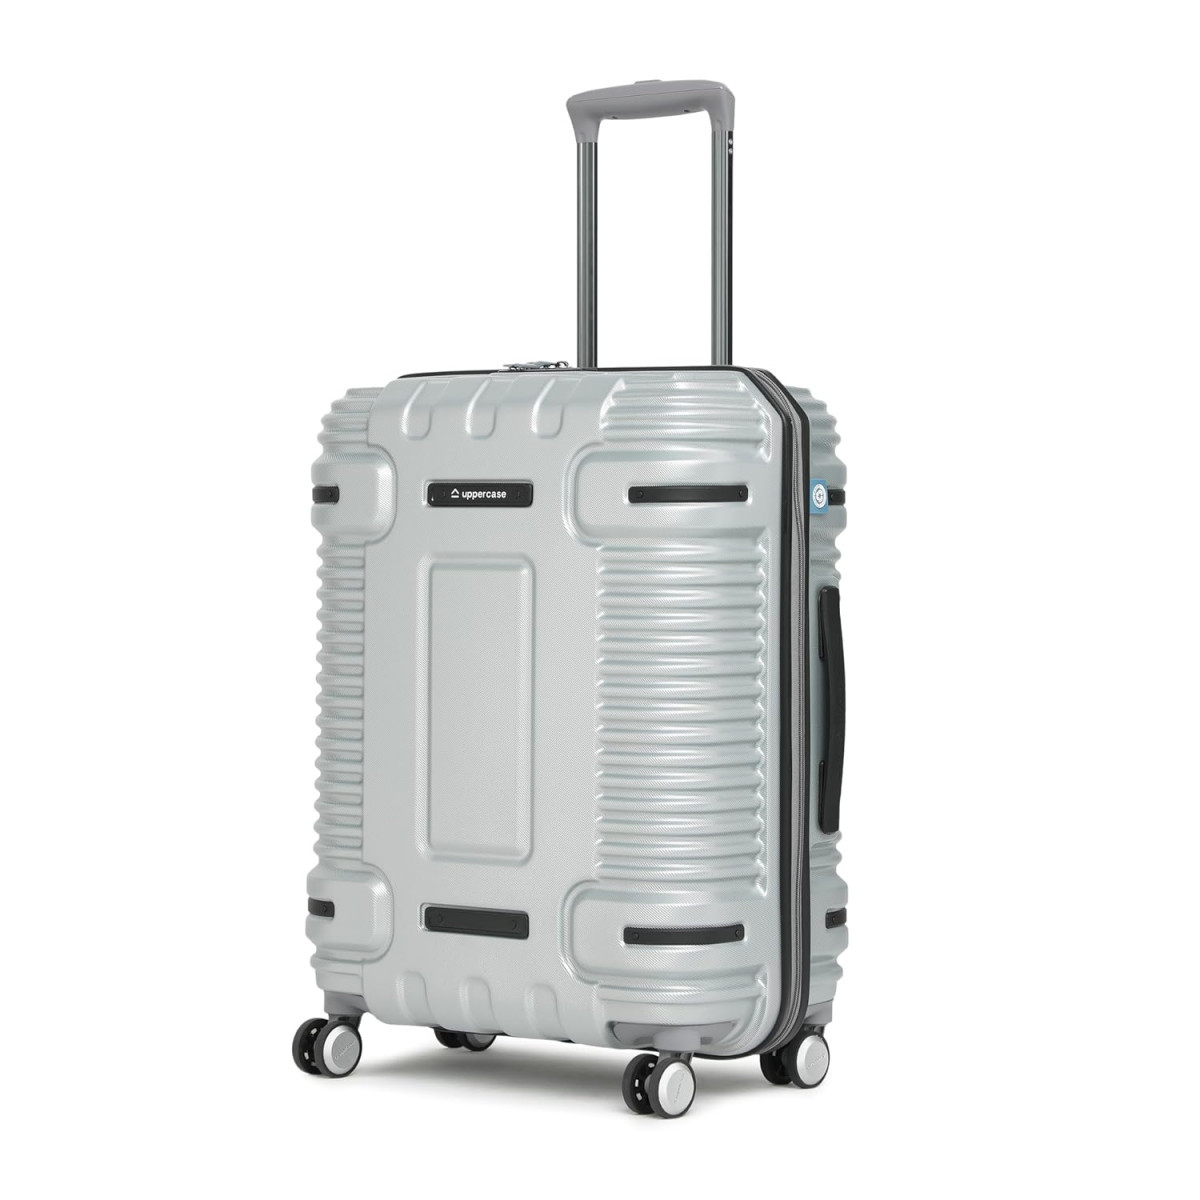 uppercase Ridge Trolley Bag Medium 66Cms Hardsided Polycarbonate Check-In Luggage 8 Wheel Trolley Bag Tsa Lock  Anti Theft Zippers Suitcase For Unisex 2000 Days Warranty Silver Spinner